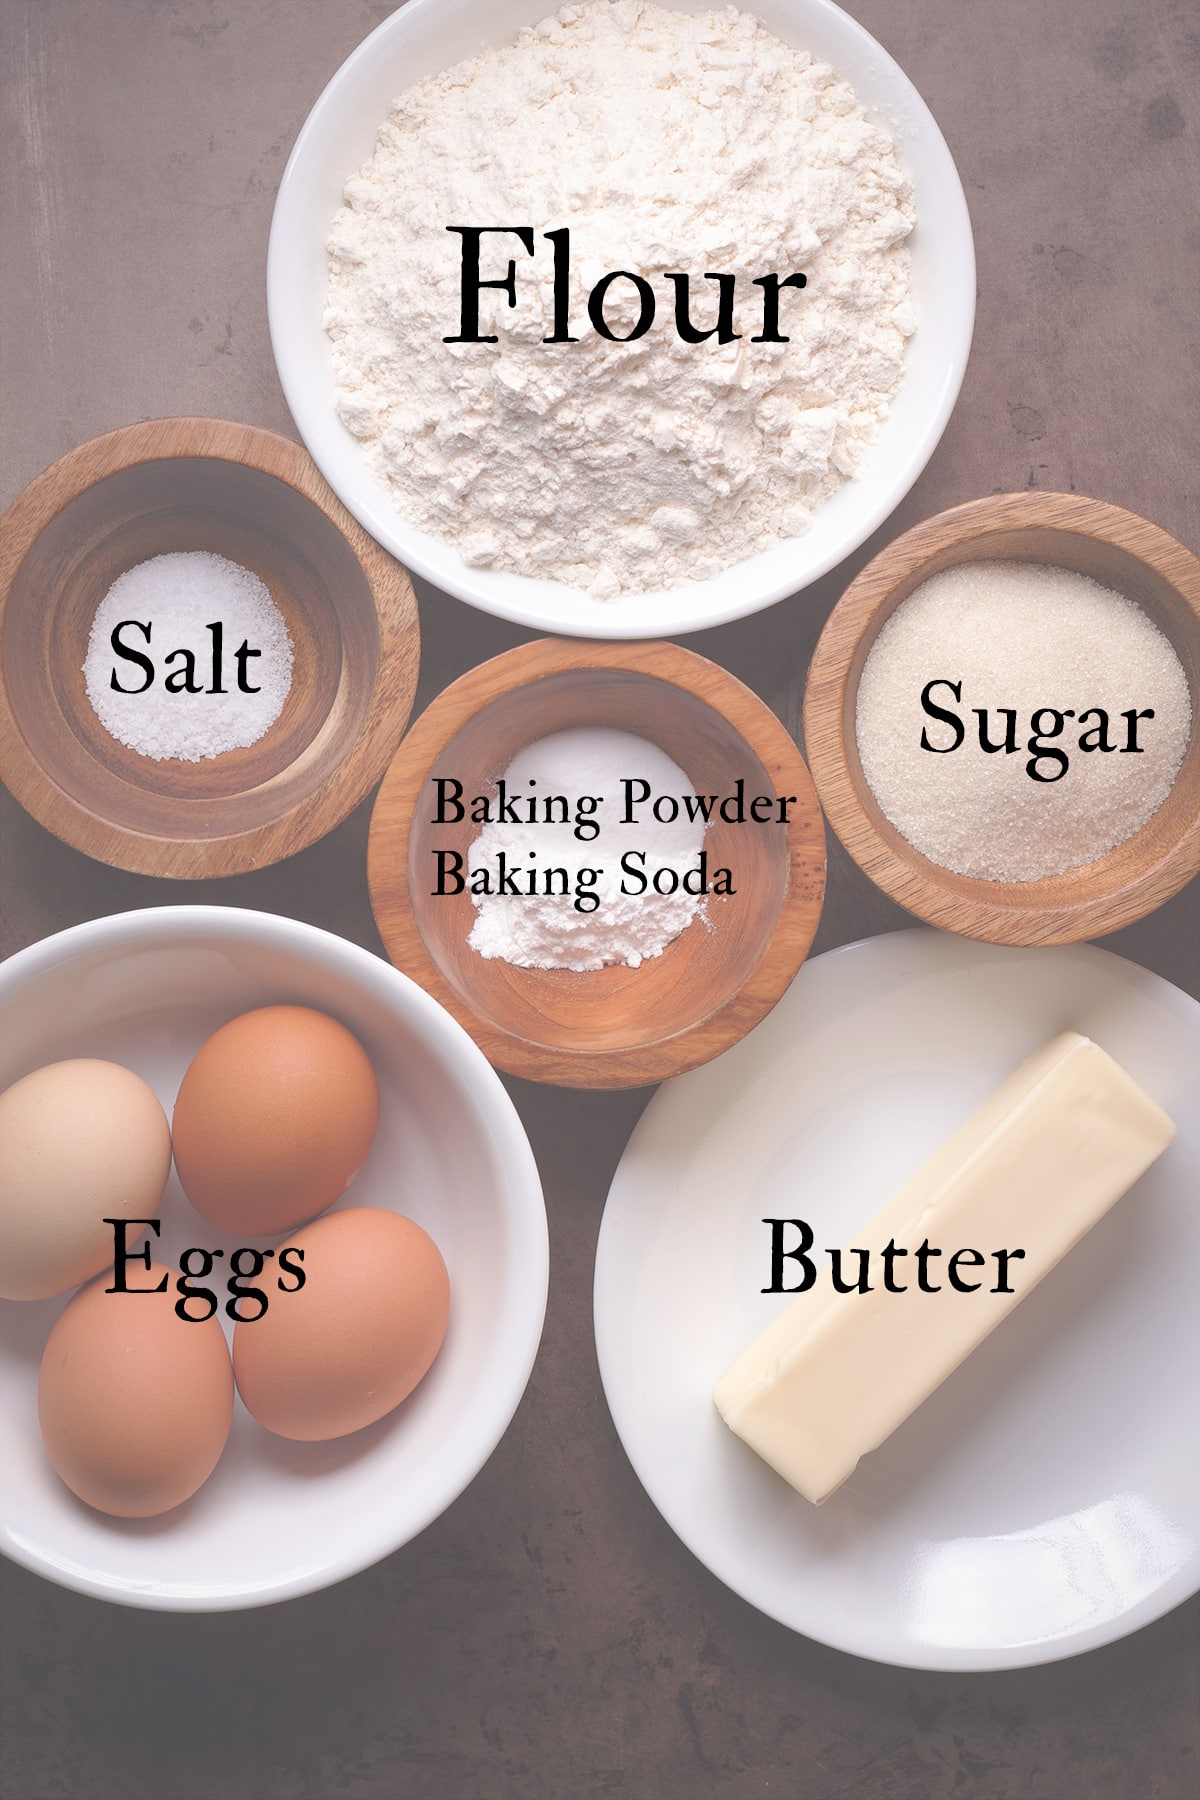 All the ingredients needed to make Everyday Quick Pancakes.